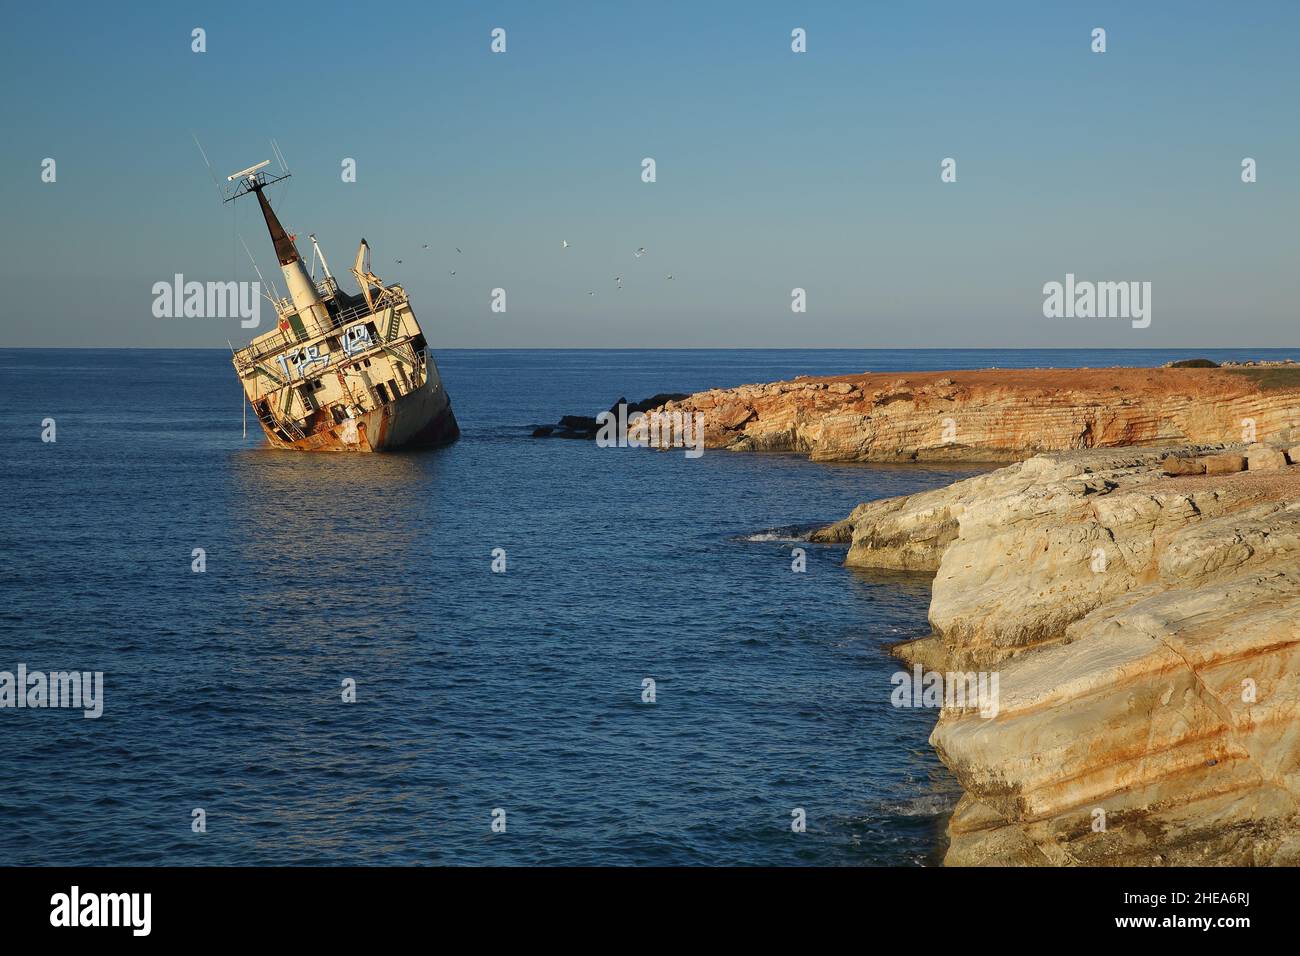 Old rusty ship vessel abandoned on Cyprus coast after an accident, nobody Stock Photo